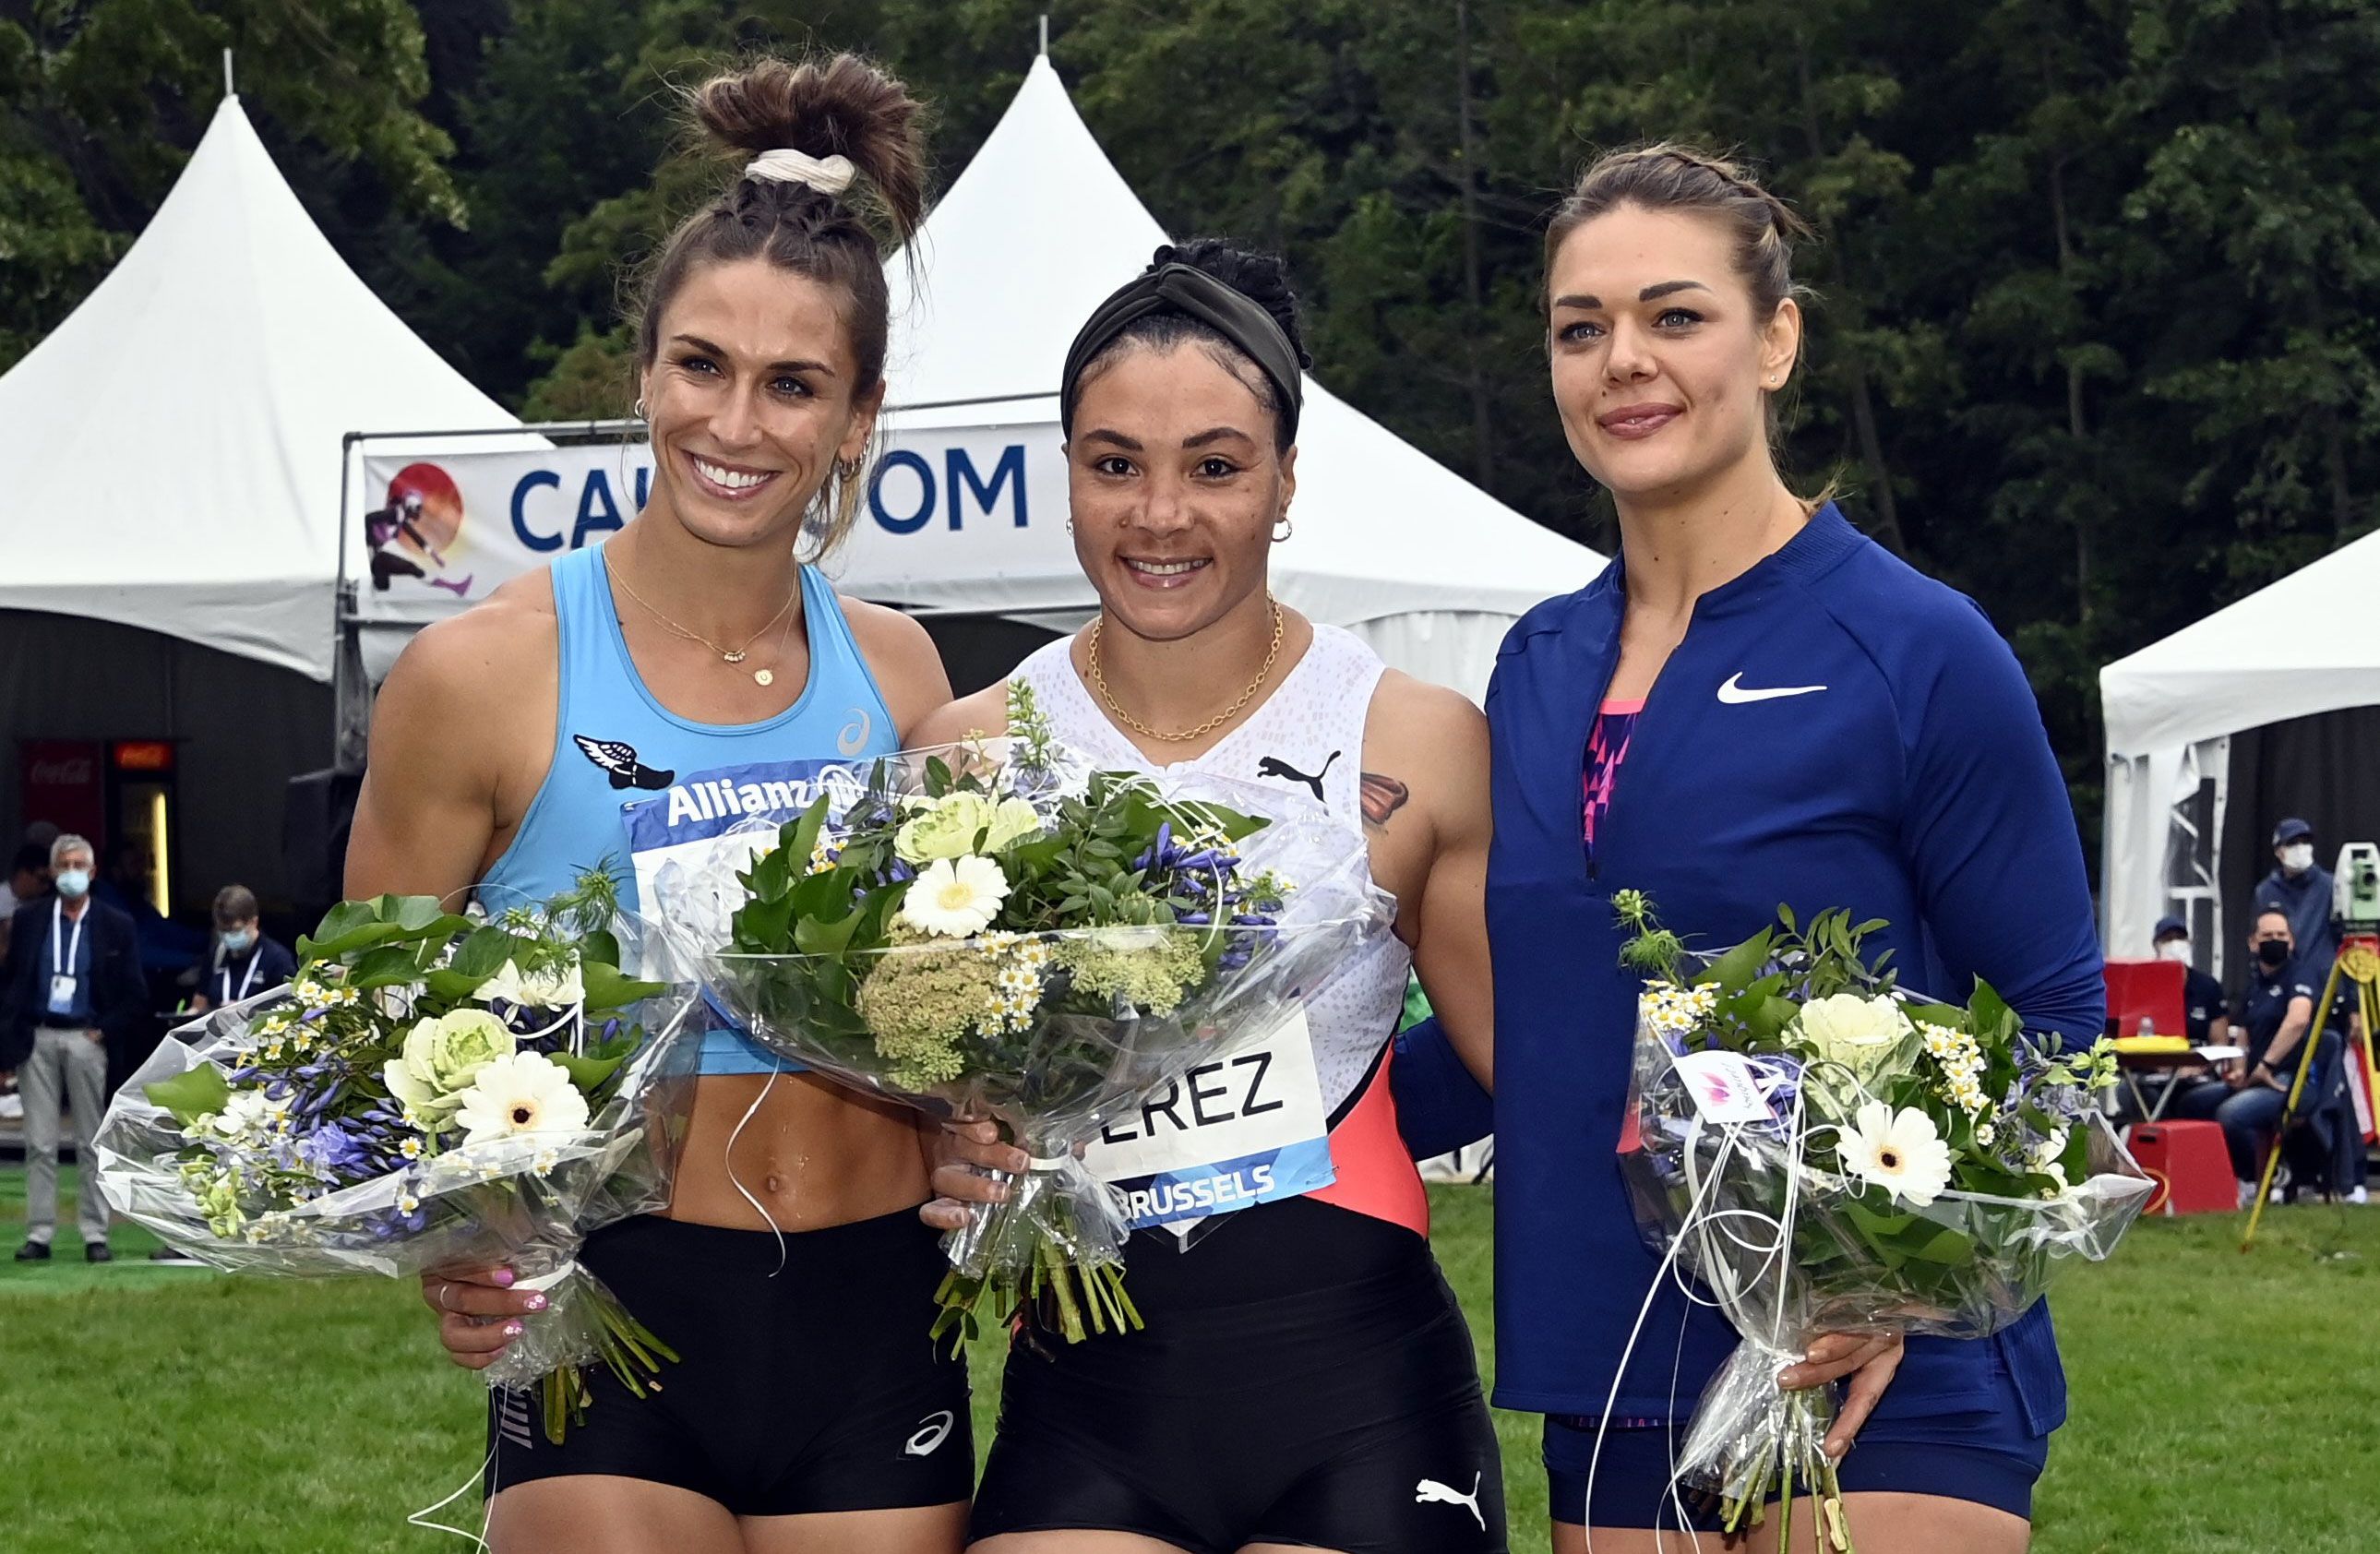 Valarie Allman, Yaime Perez and Sandra Perkovic at the 2021 Diamond League meeting in Brussels